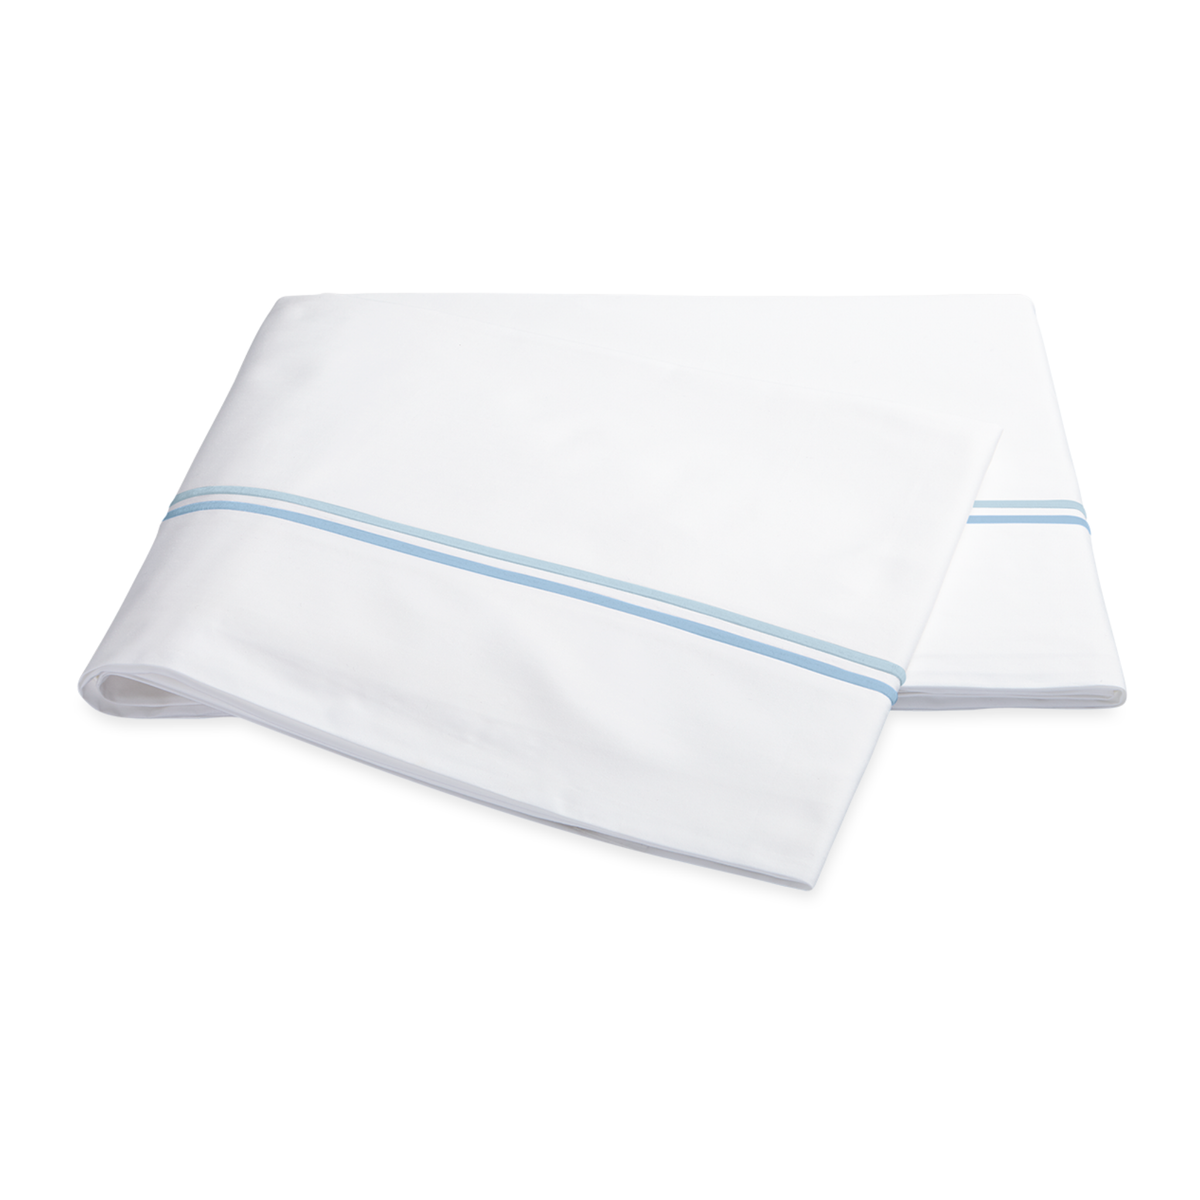 Flat Sheet of Matouk Essex Bedding Collection in Lightblue Color